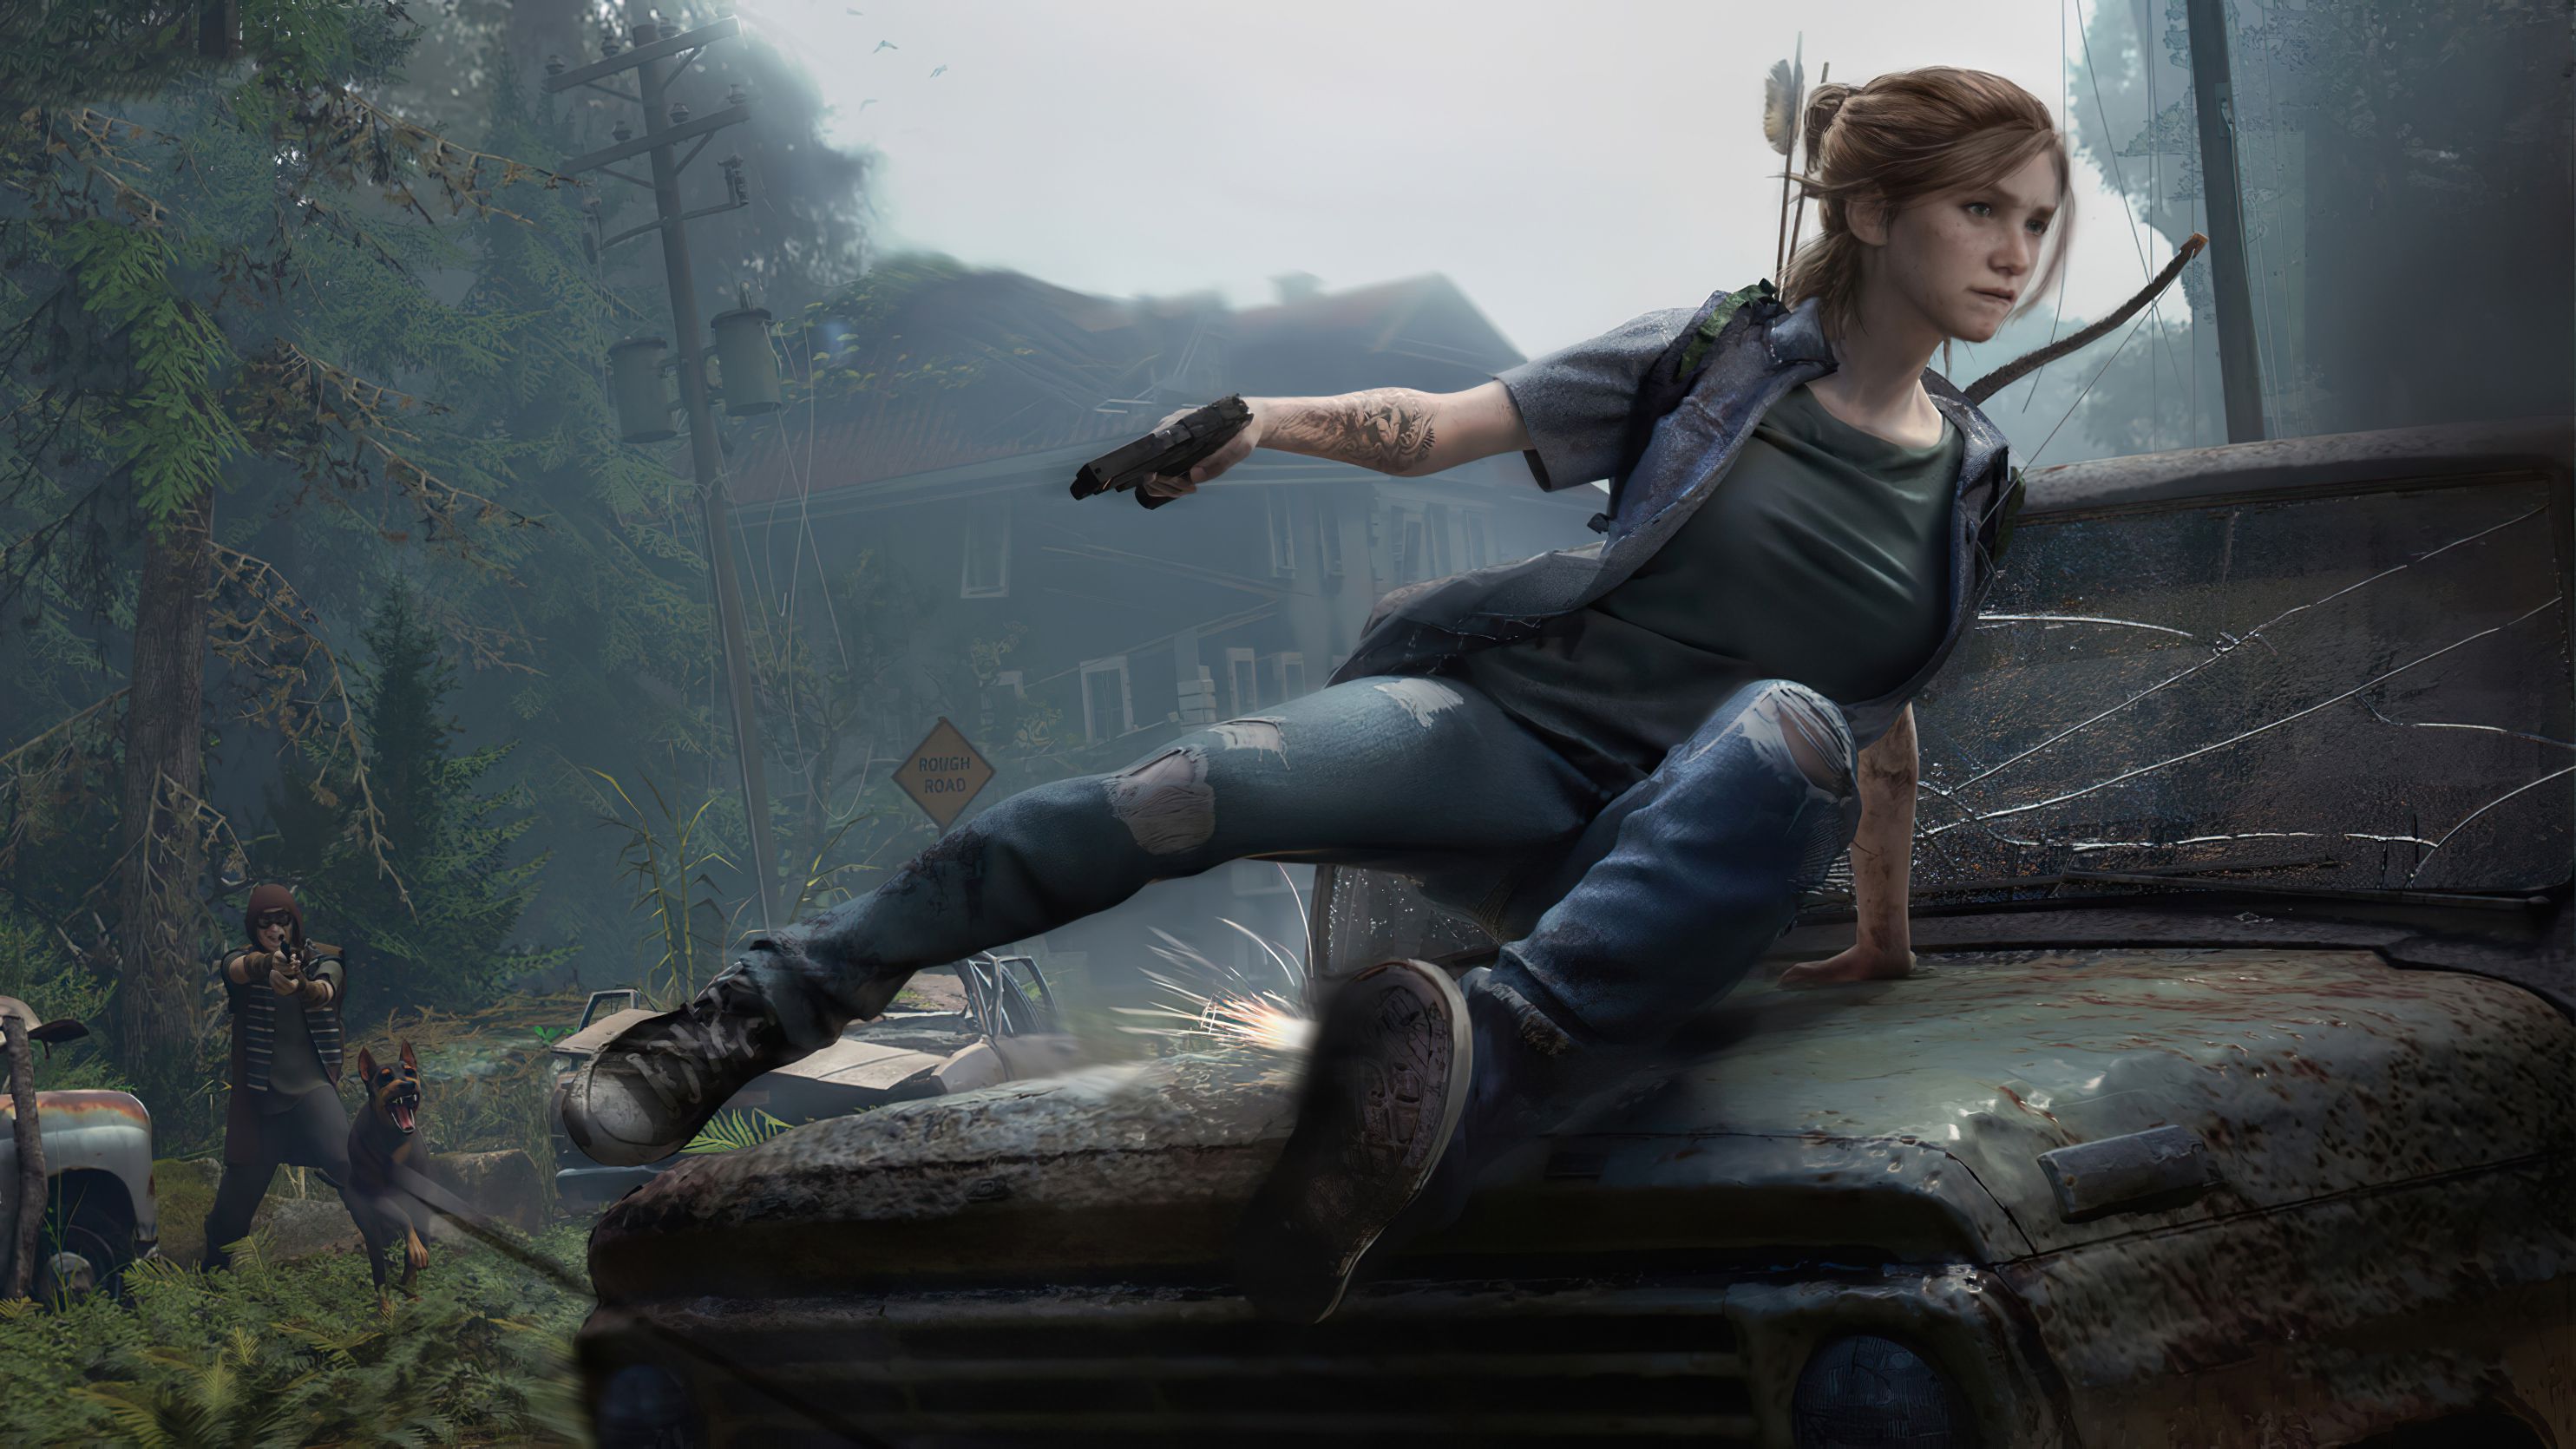 Ellie Williams, video game characters, The Last of Us, The Last of Us pistol, video games, video game girls, digita. The last of us, Video games girls, Fan art